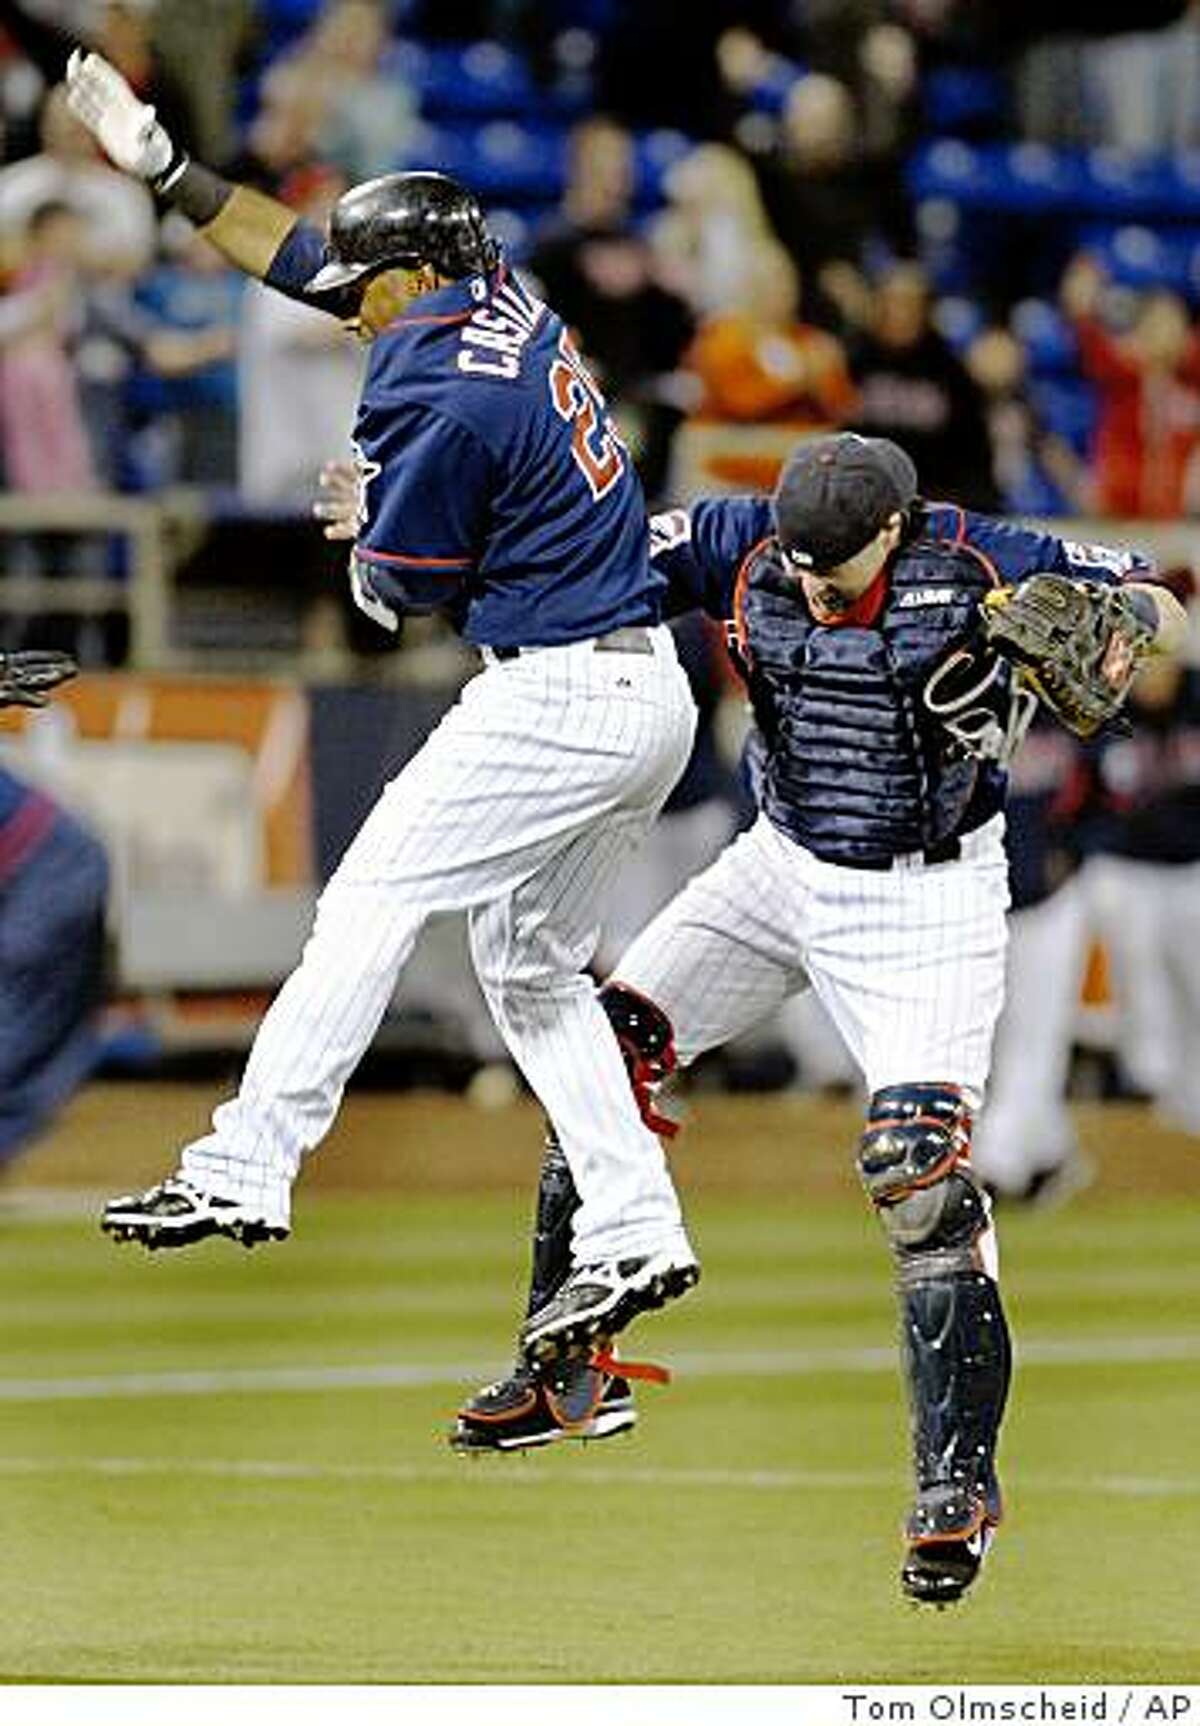 Minnesota Twins' Alexi Casilla, left, celebrates with bullpen catcher Mike Redmond after Casilla singled in two runs in the ninth inning to give the Twins a 6-5 win over the Seattle Mariners in a baseball game Tuesday, April 7, 2009, in Minneapolis. (AP Photo/Tom Olmscheid)